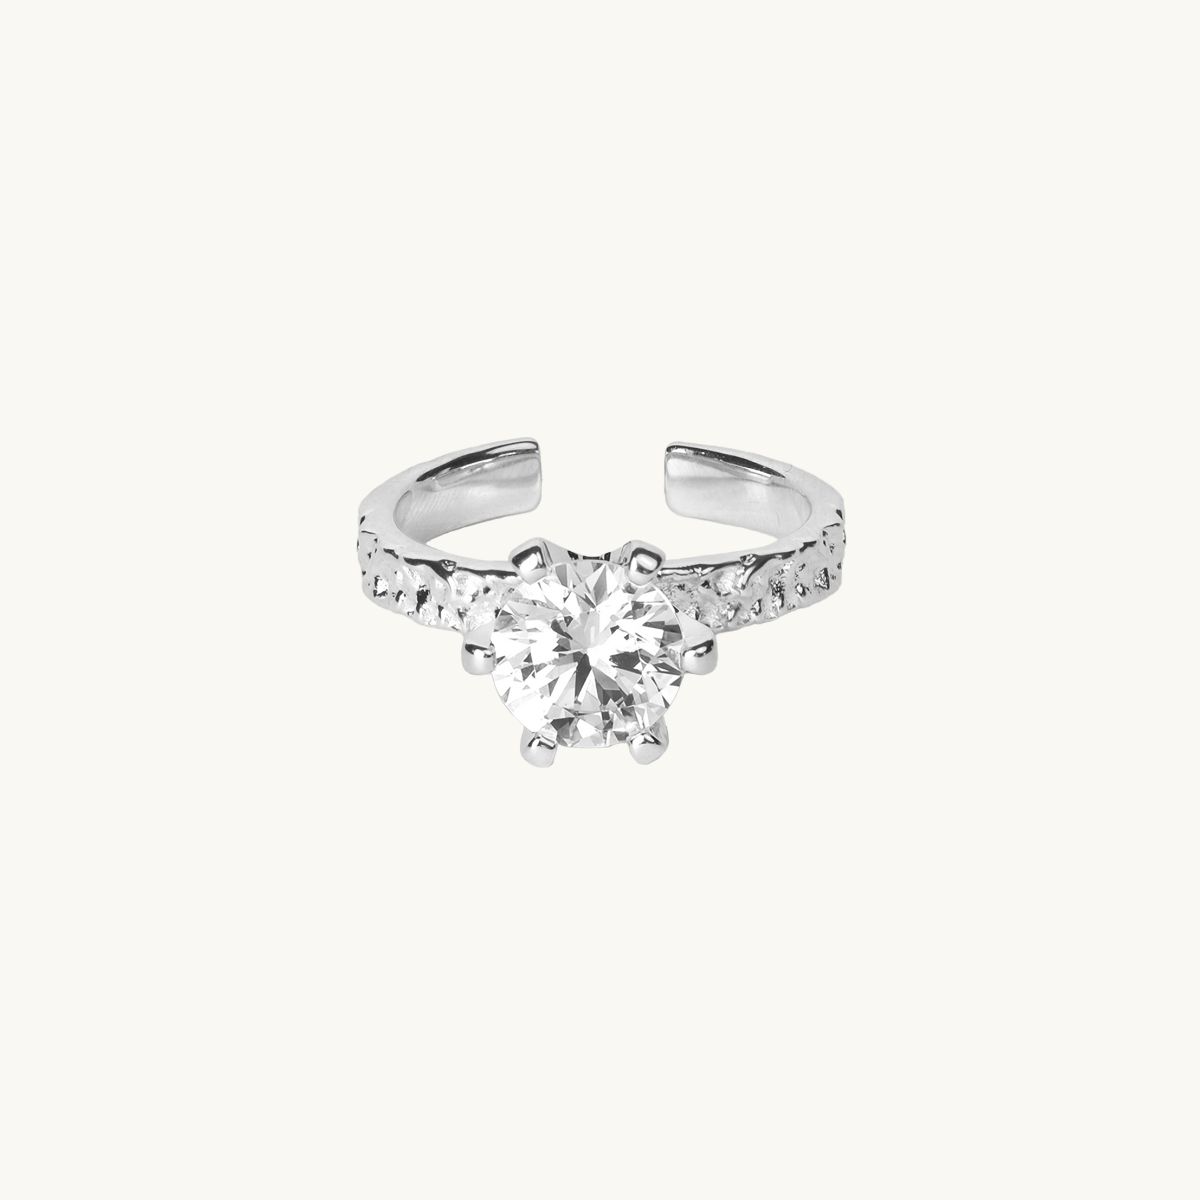 Adjustable princess ring in silver with cz stone